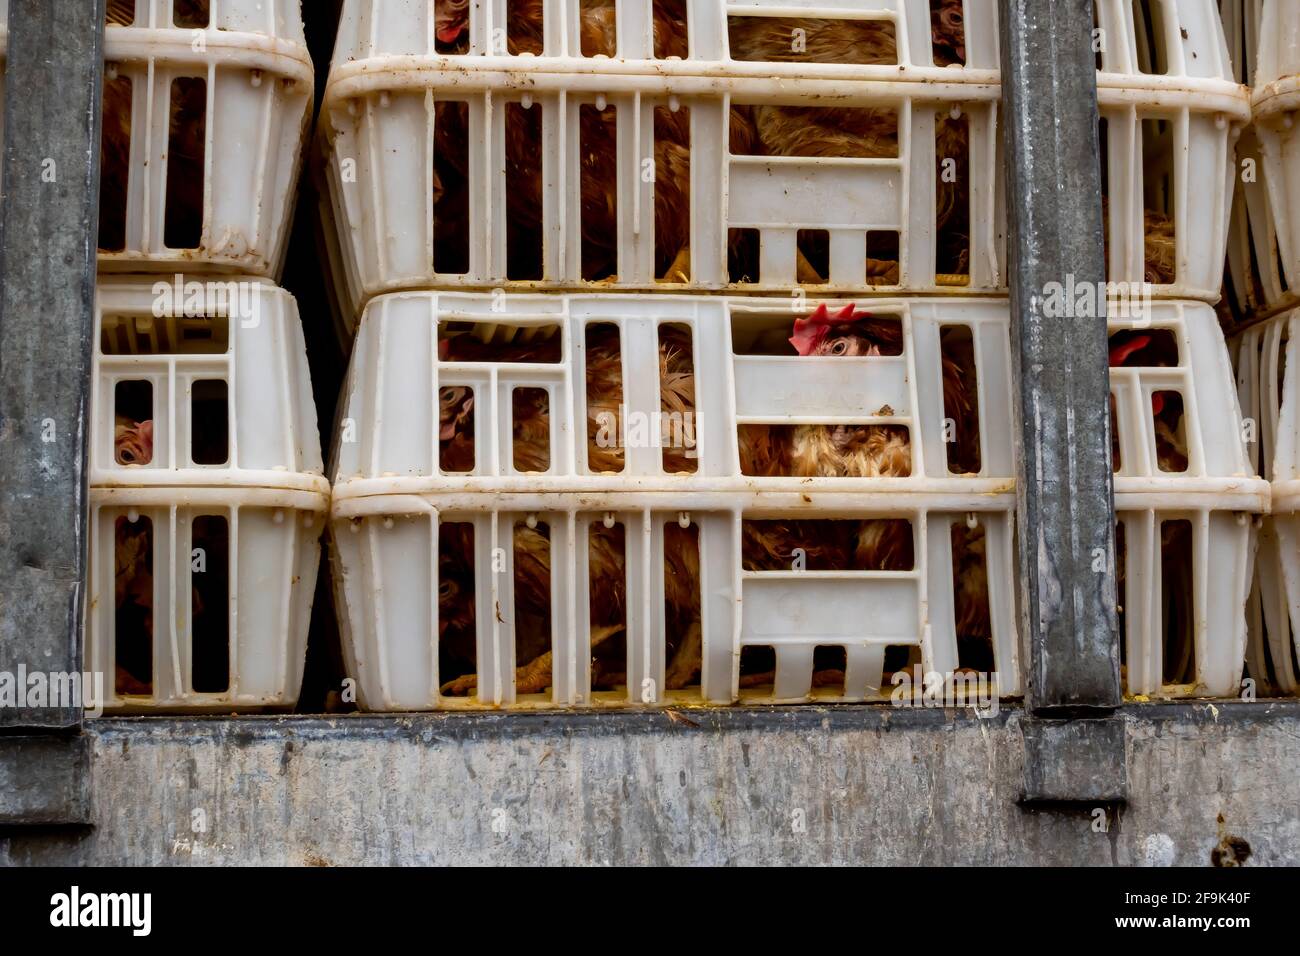 Chickens packed in plastic crates during transport to the slaughterhouse. A close-up of one box showing the suffering of animals Stock Photo